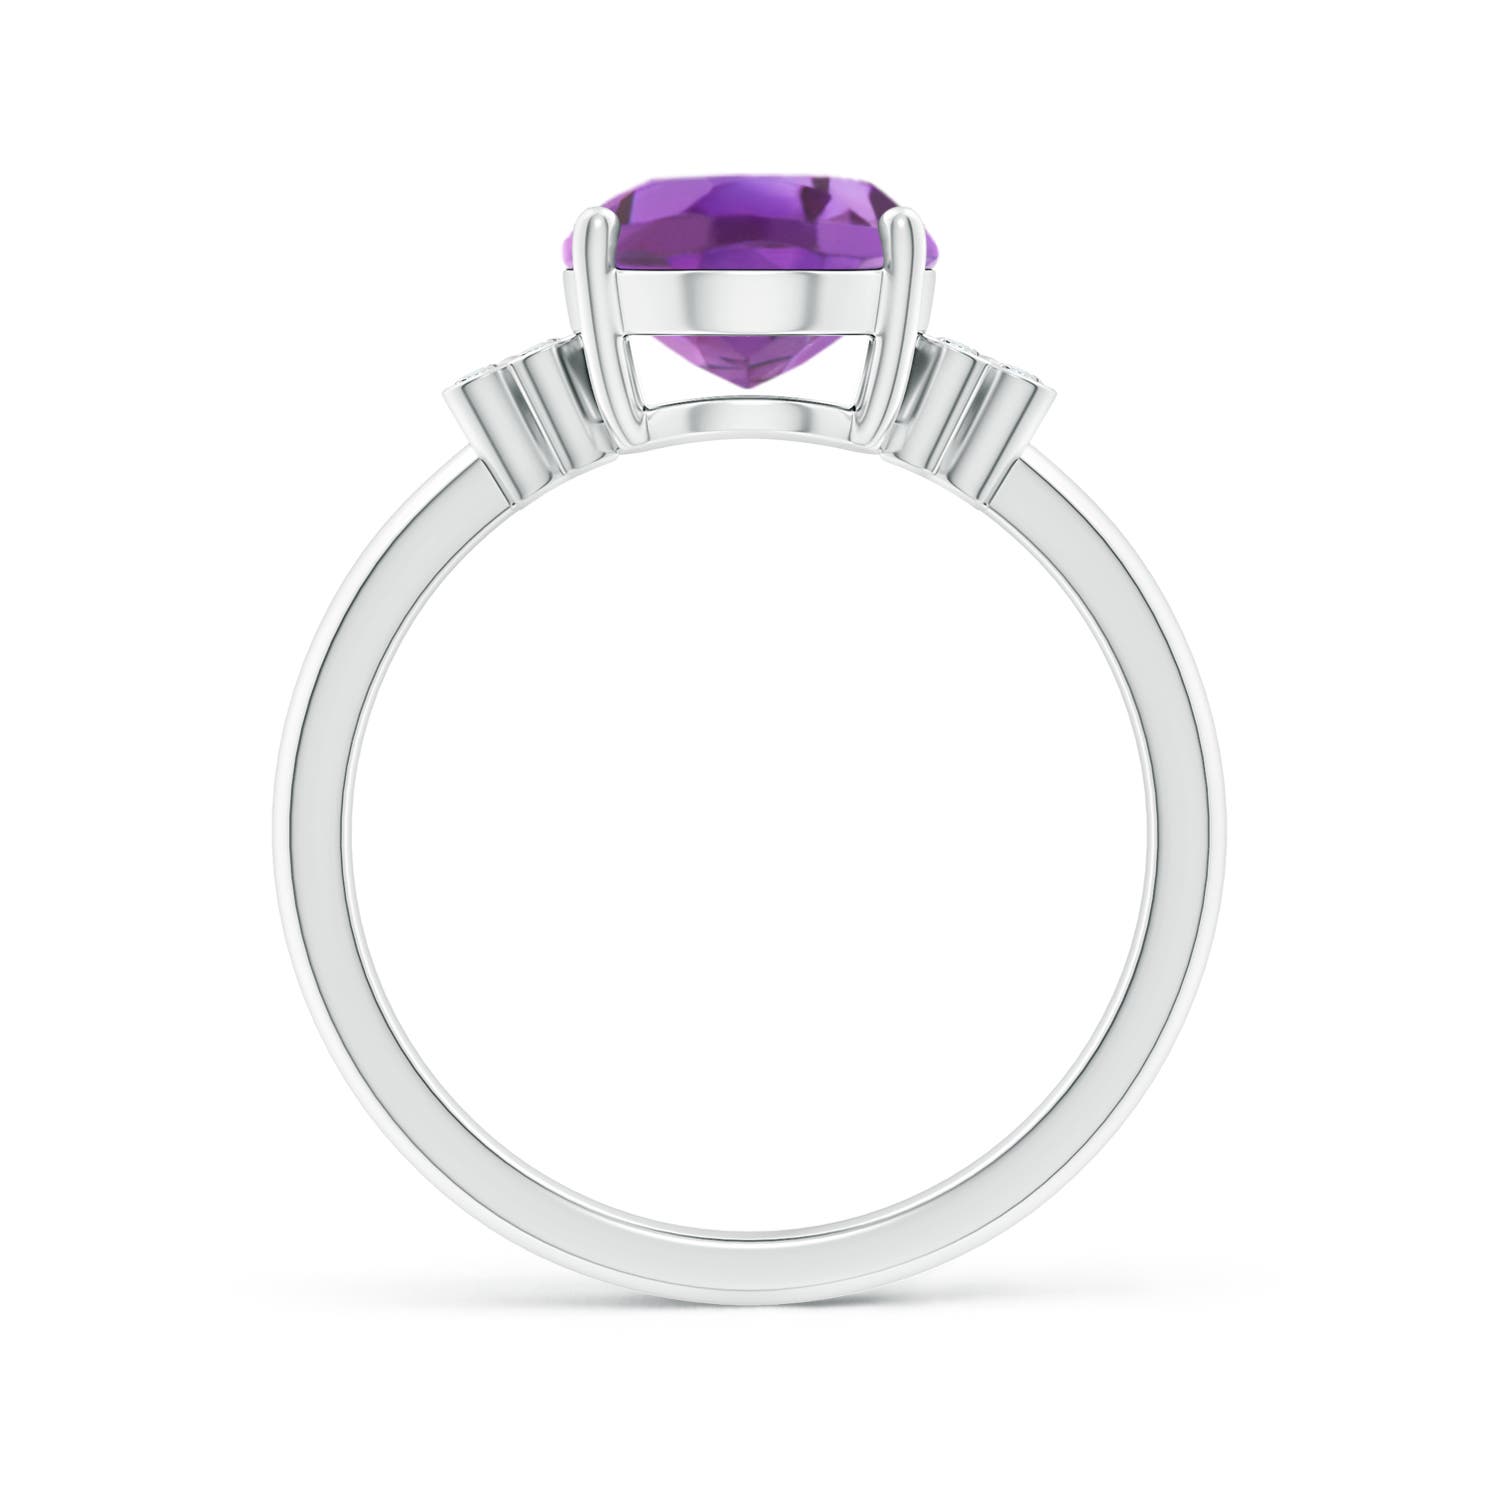 A- Amethyst / 2.36 CT / 14 KT White Gold